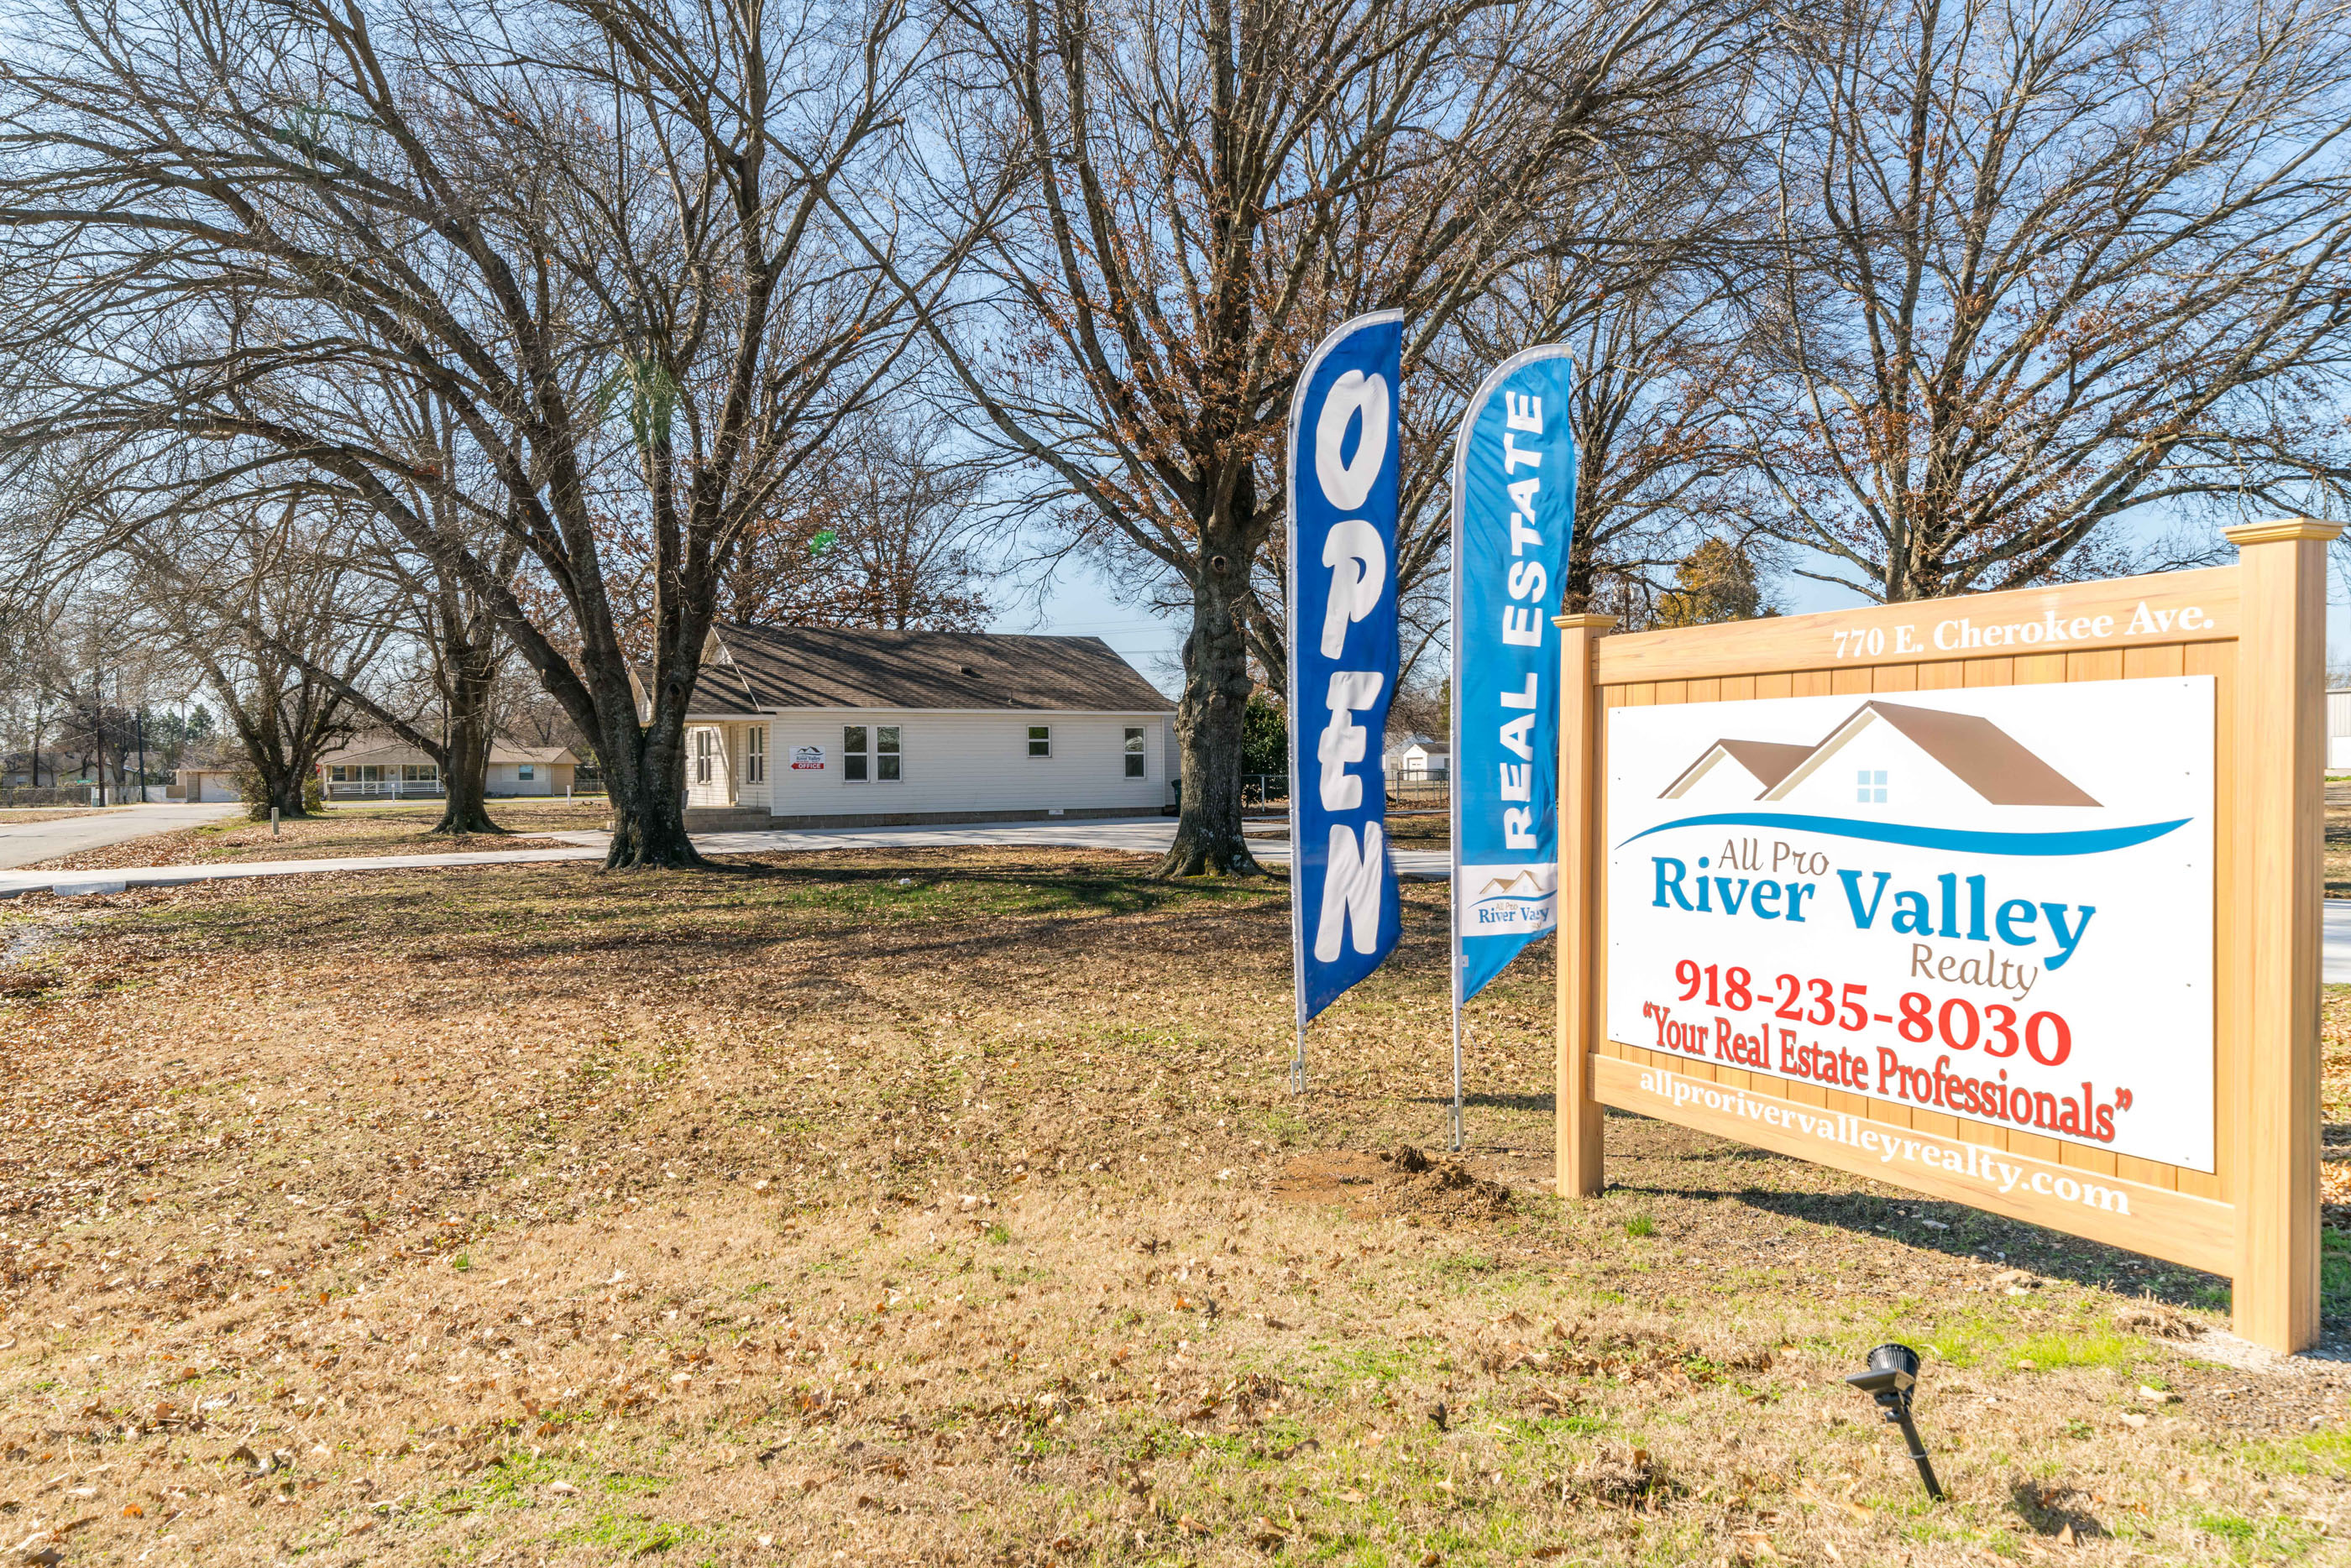 All Pro River Valley Realty - Sallisaw Office